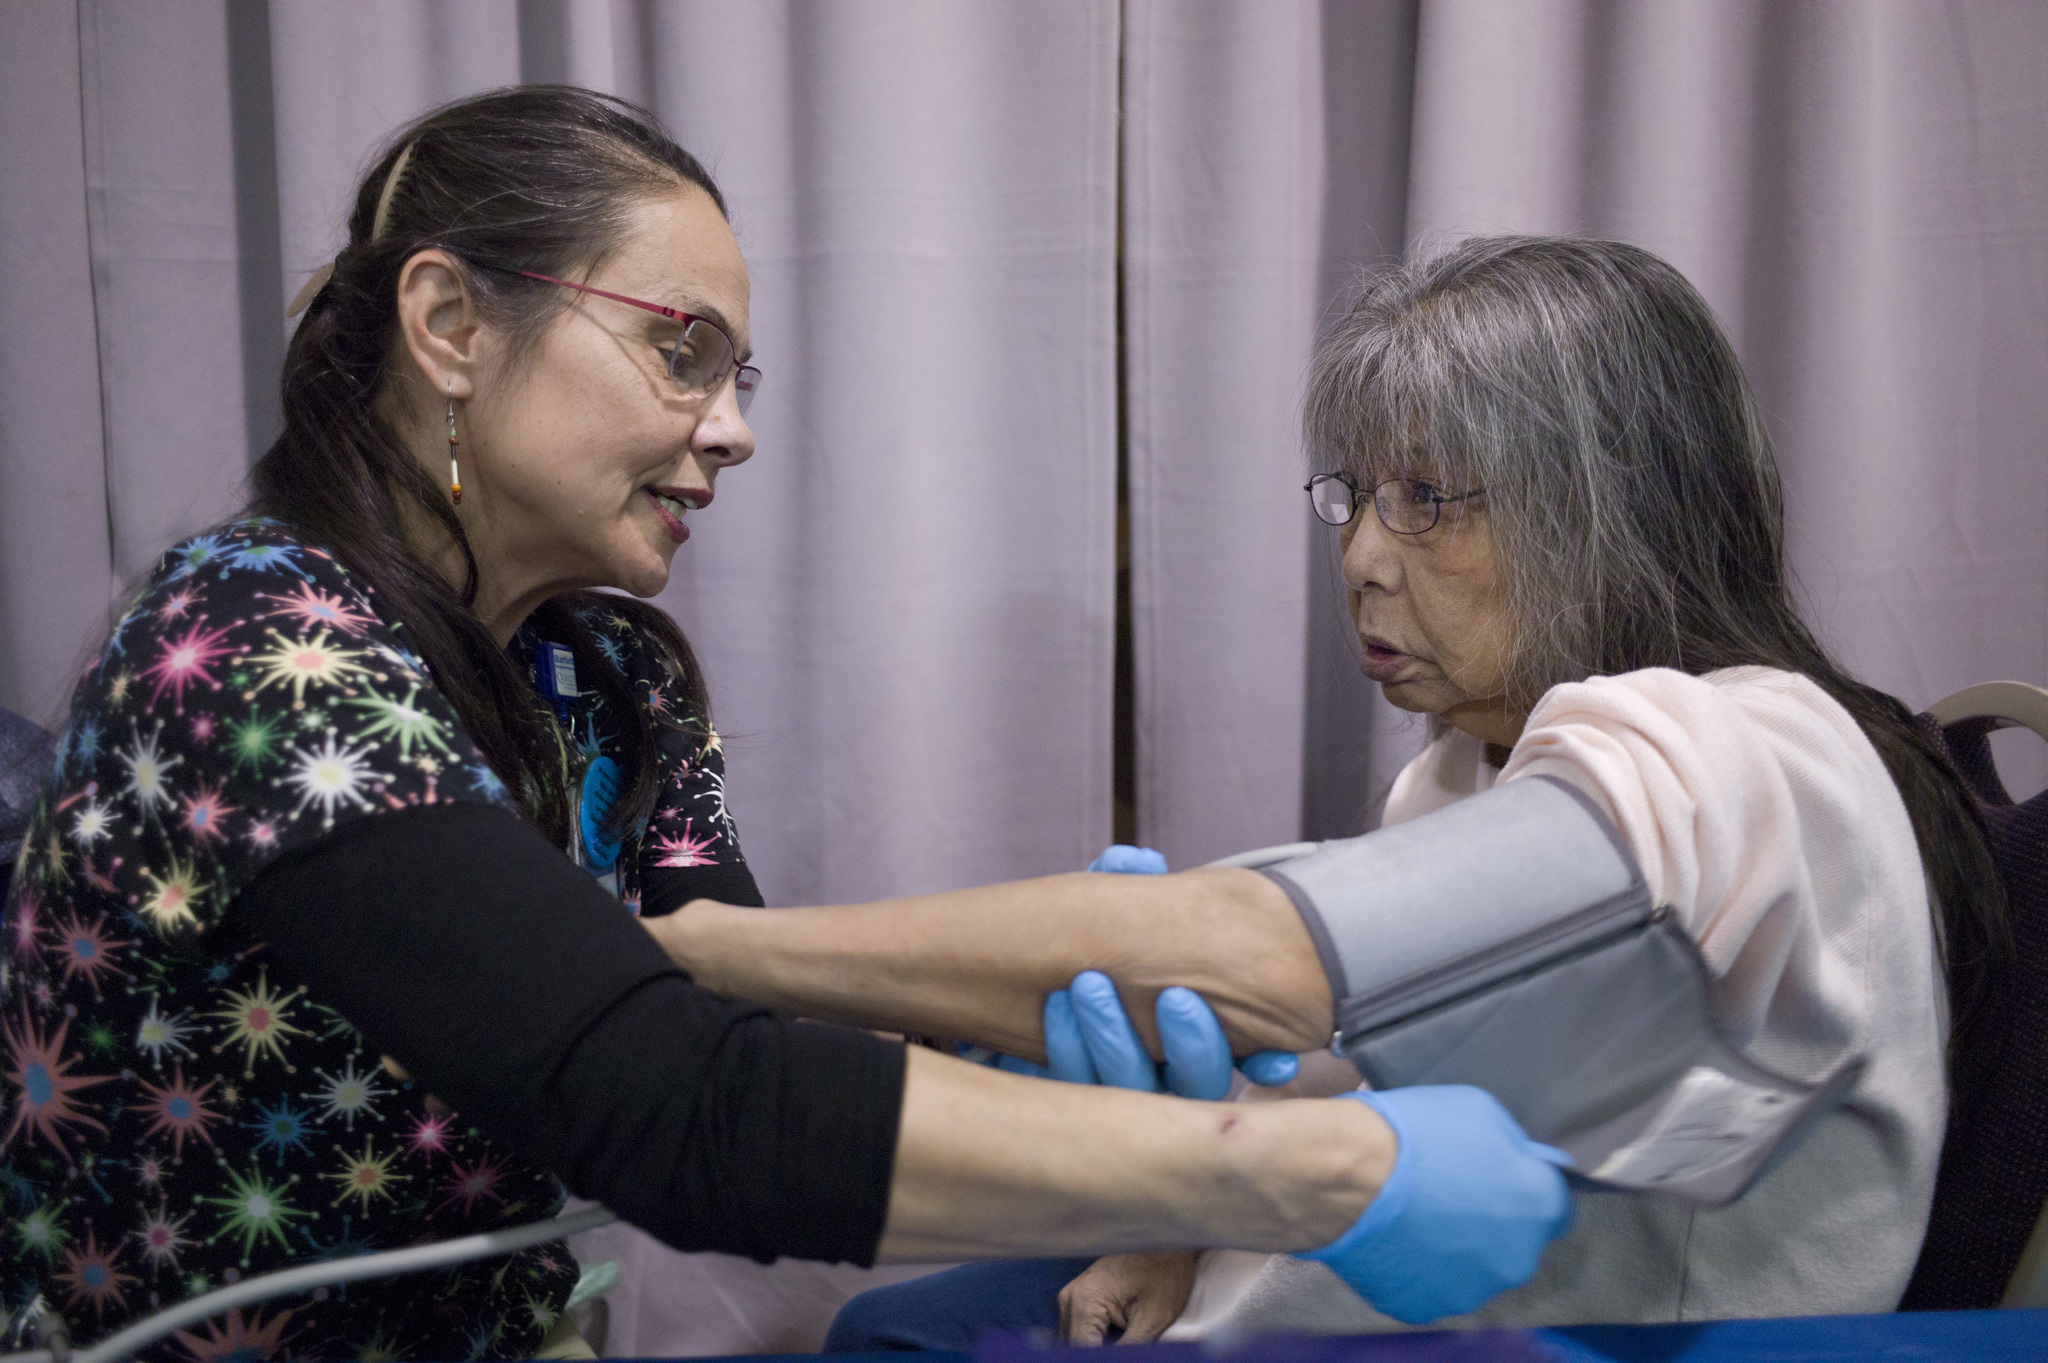 Mynita Gonzales, right, has her blood pressure, blood sugar and cholesterol checked by Laura Stats, of Bartlett Regional Hospital, during the Juneau Coalition on Housing & Homelessness’ Project Homeless Connect in the Juneau Arts & Culture Center on Wednesday, Jan. 25, 2017. (Michael Penn | Juneau Empire)